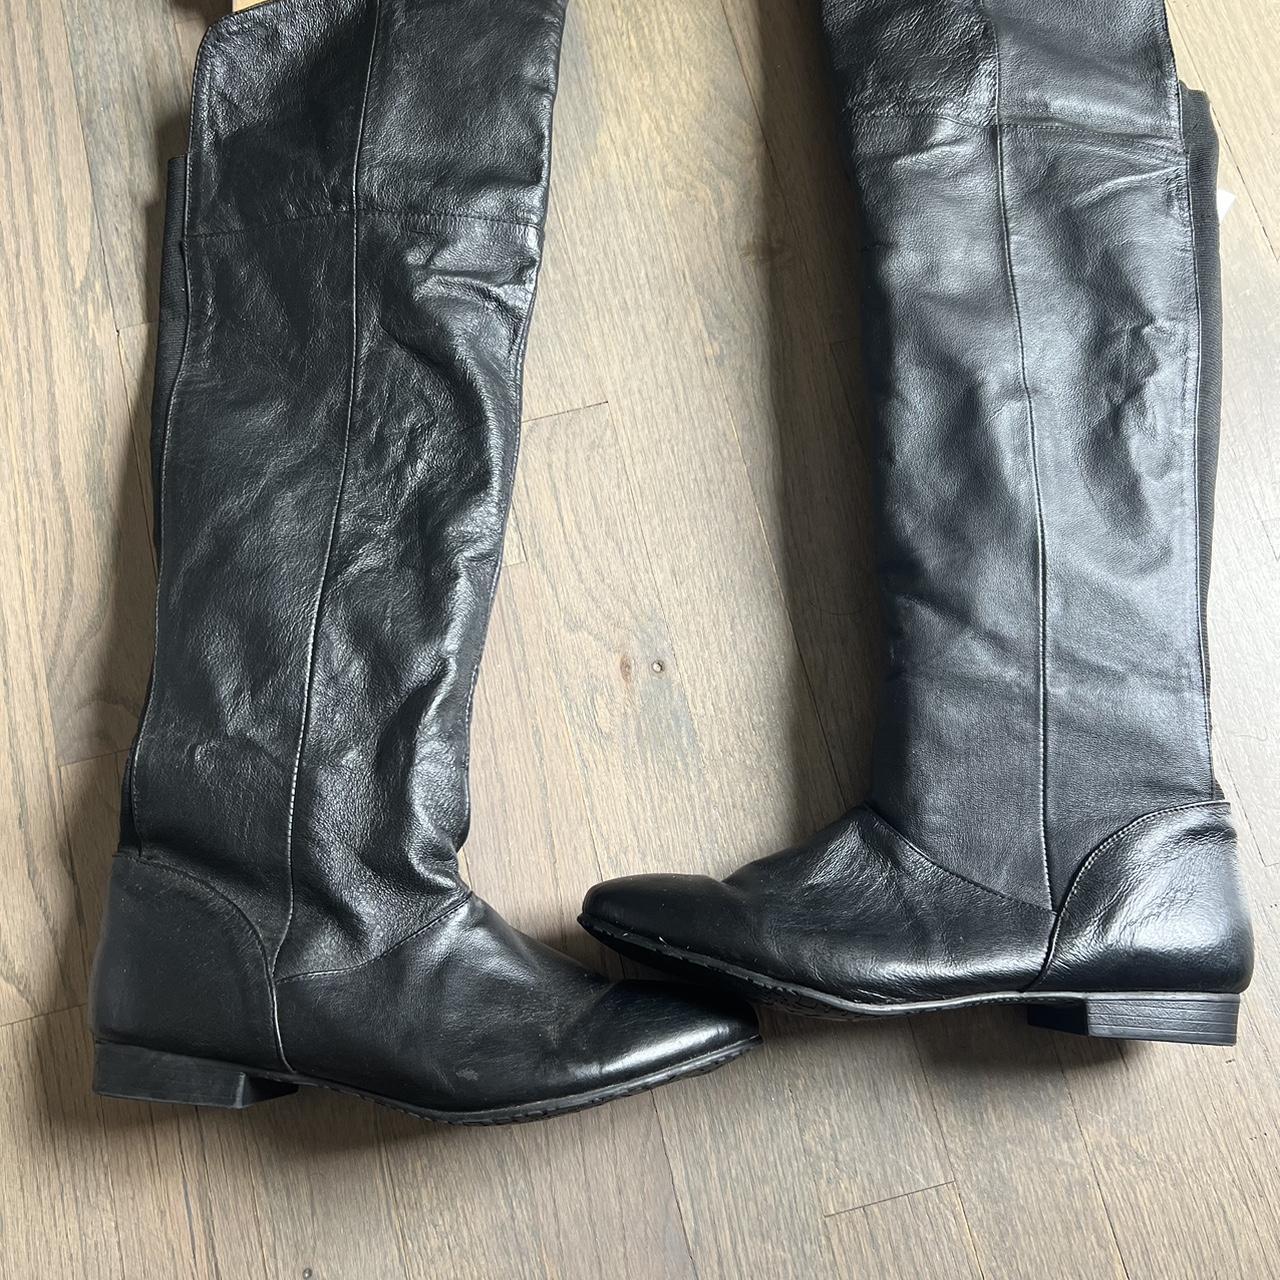 Chinese Laundry knee high boots - Depop